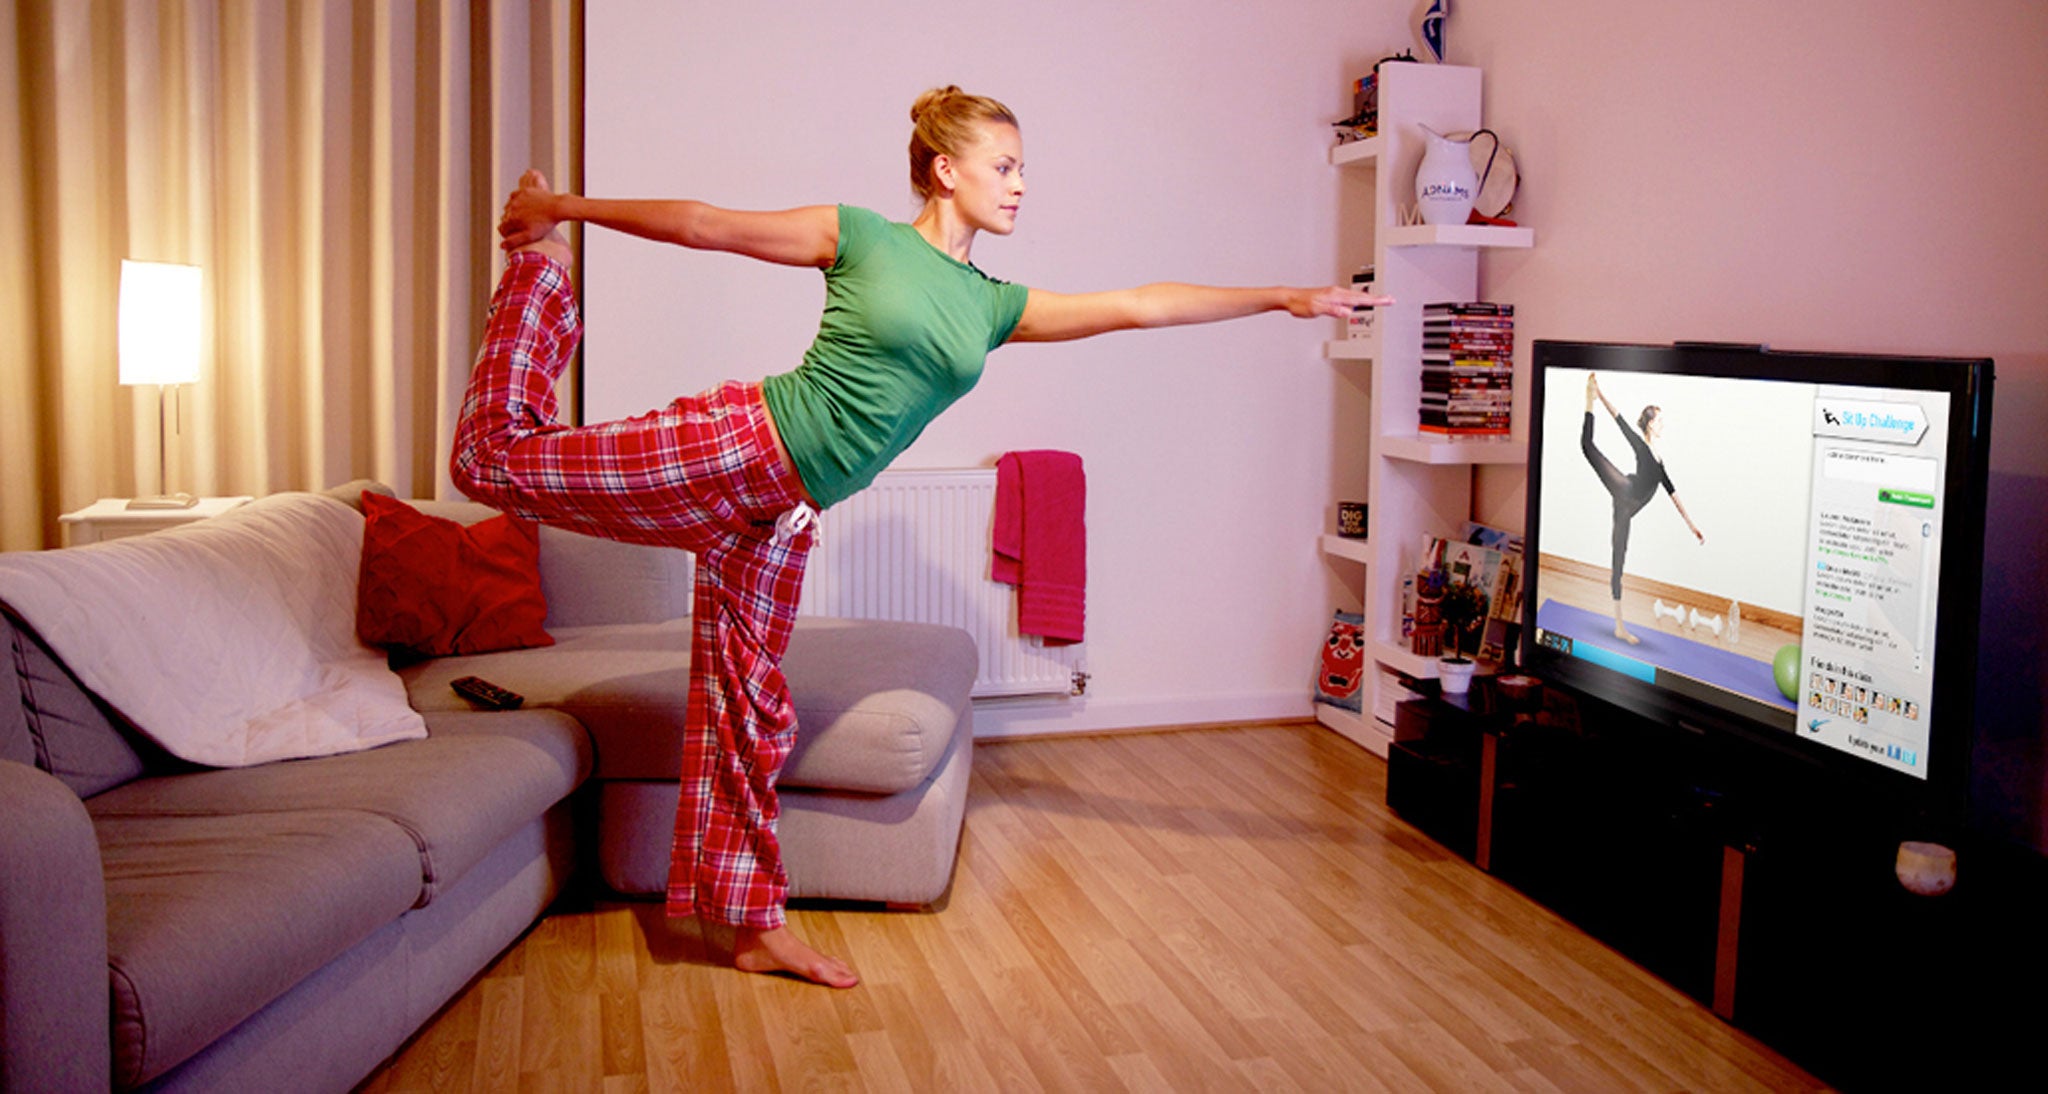 DIY exercise: an Instructor Live user takes a class from home with online guidance